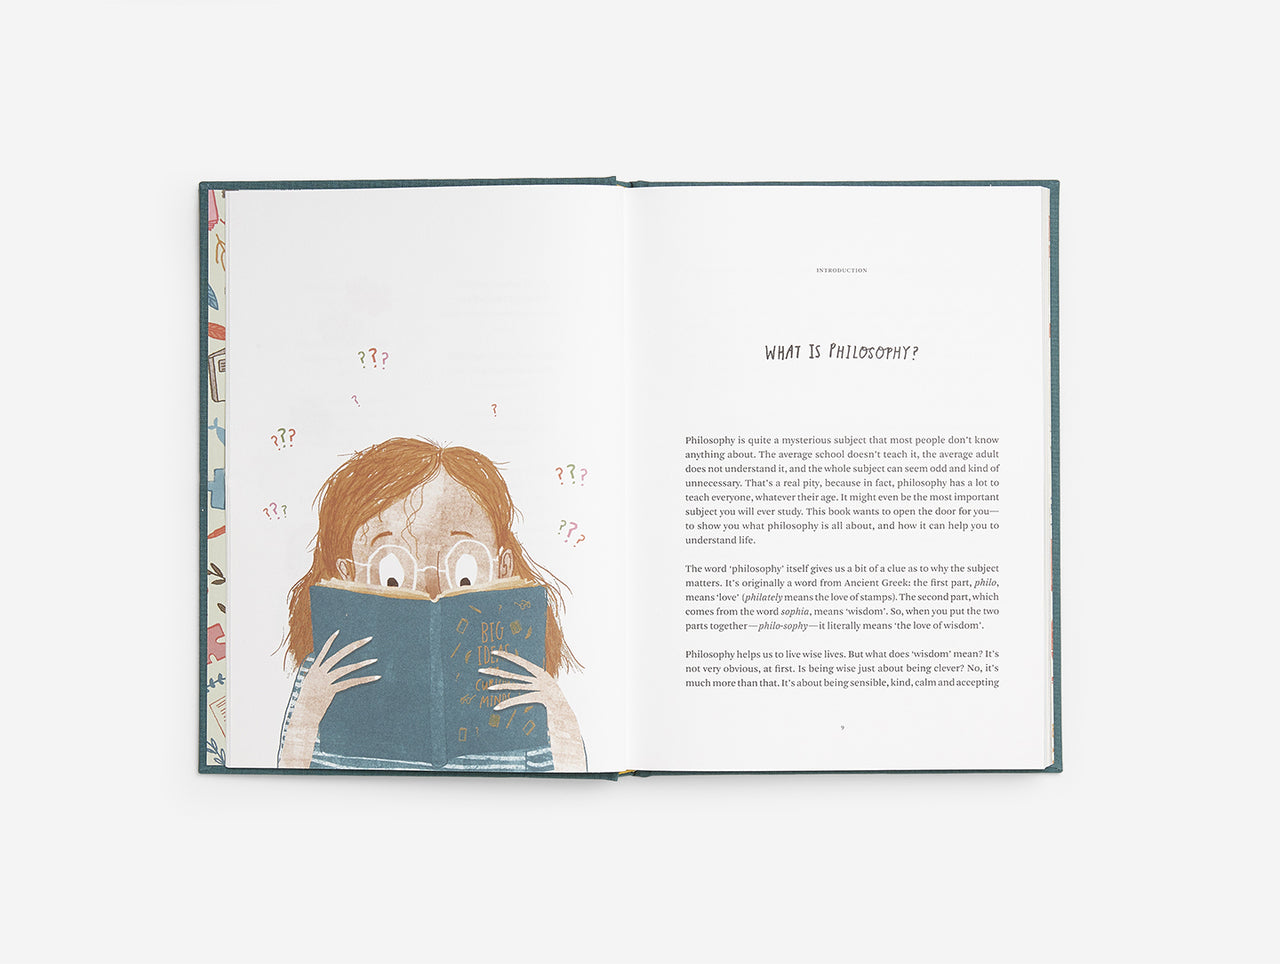 Image of a book opened at the centre. Left page is an illustration of a girl wearing glasses holding a book. The right is text with the title 'What is Philosophy?'